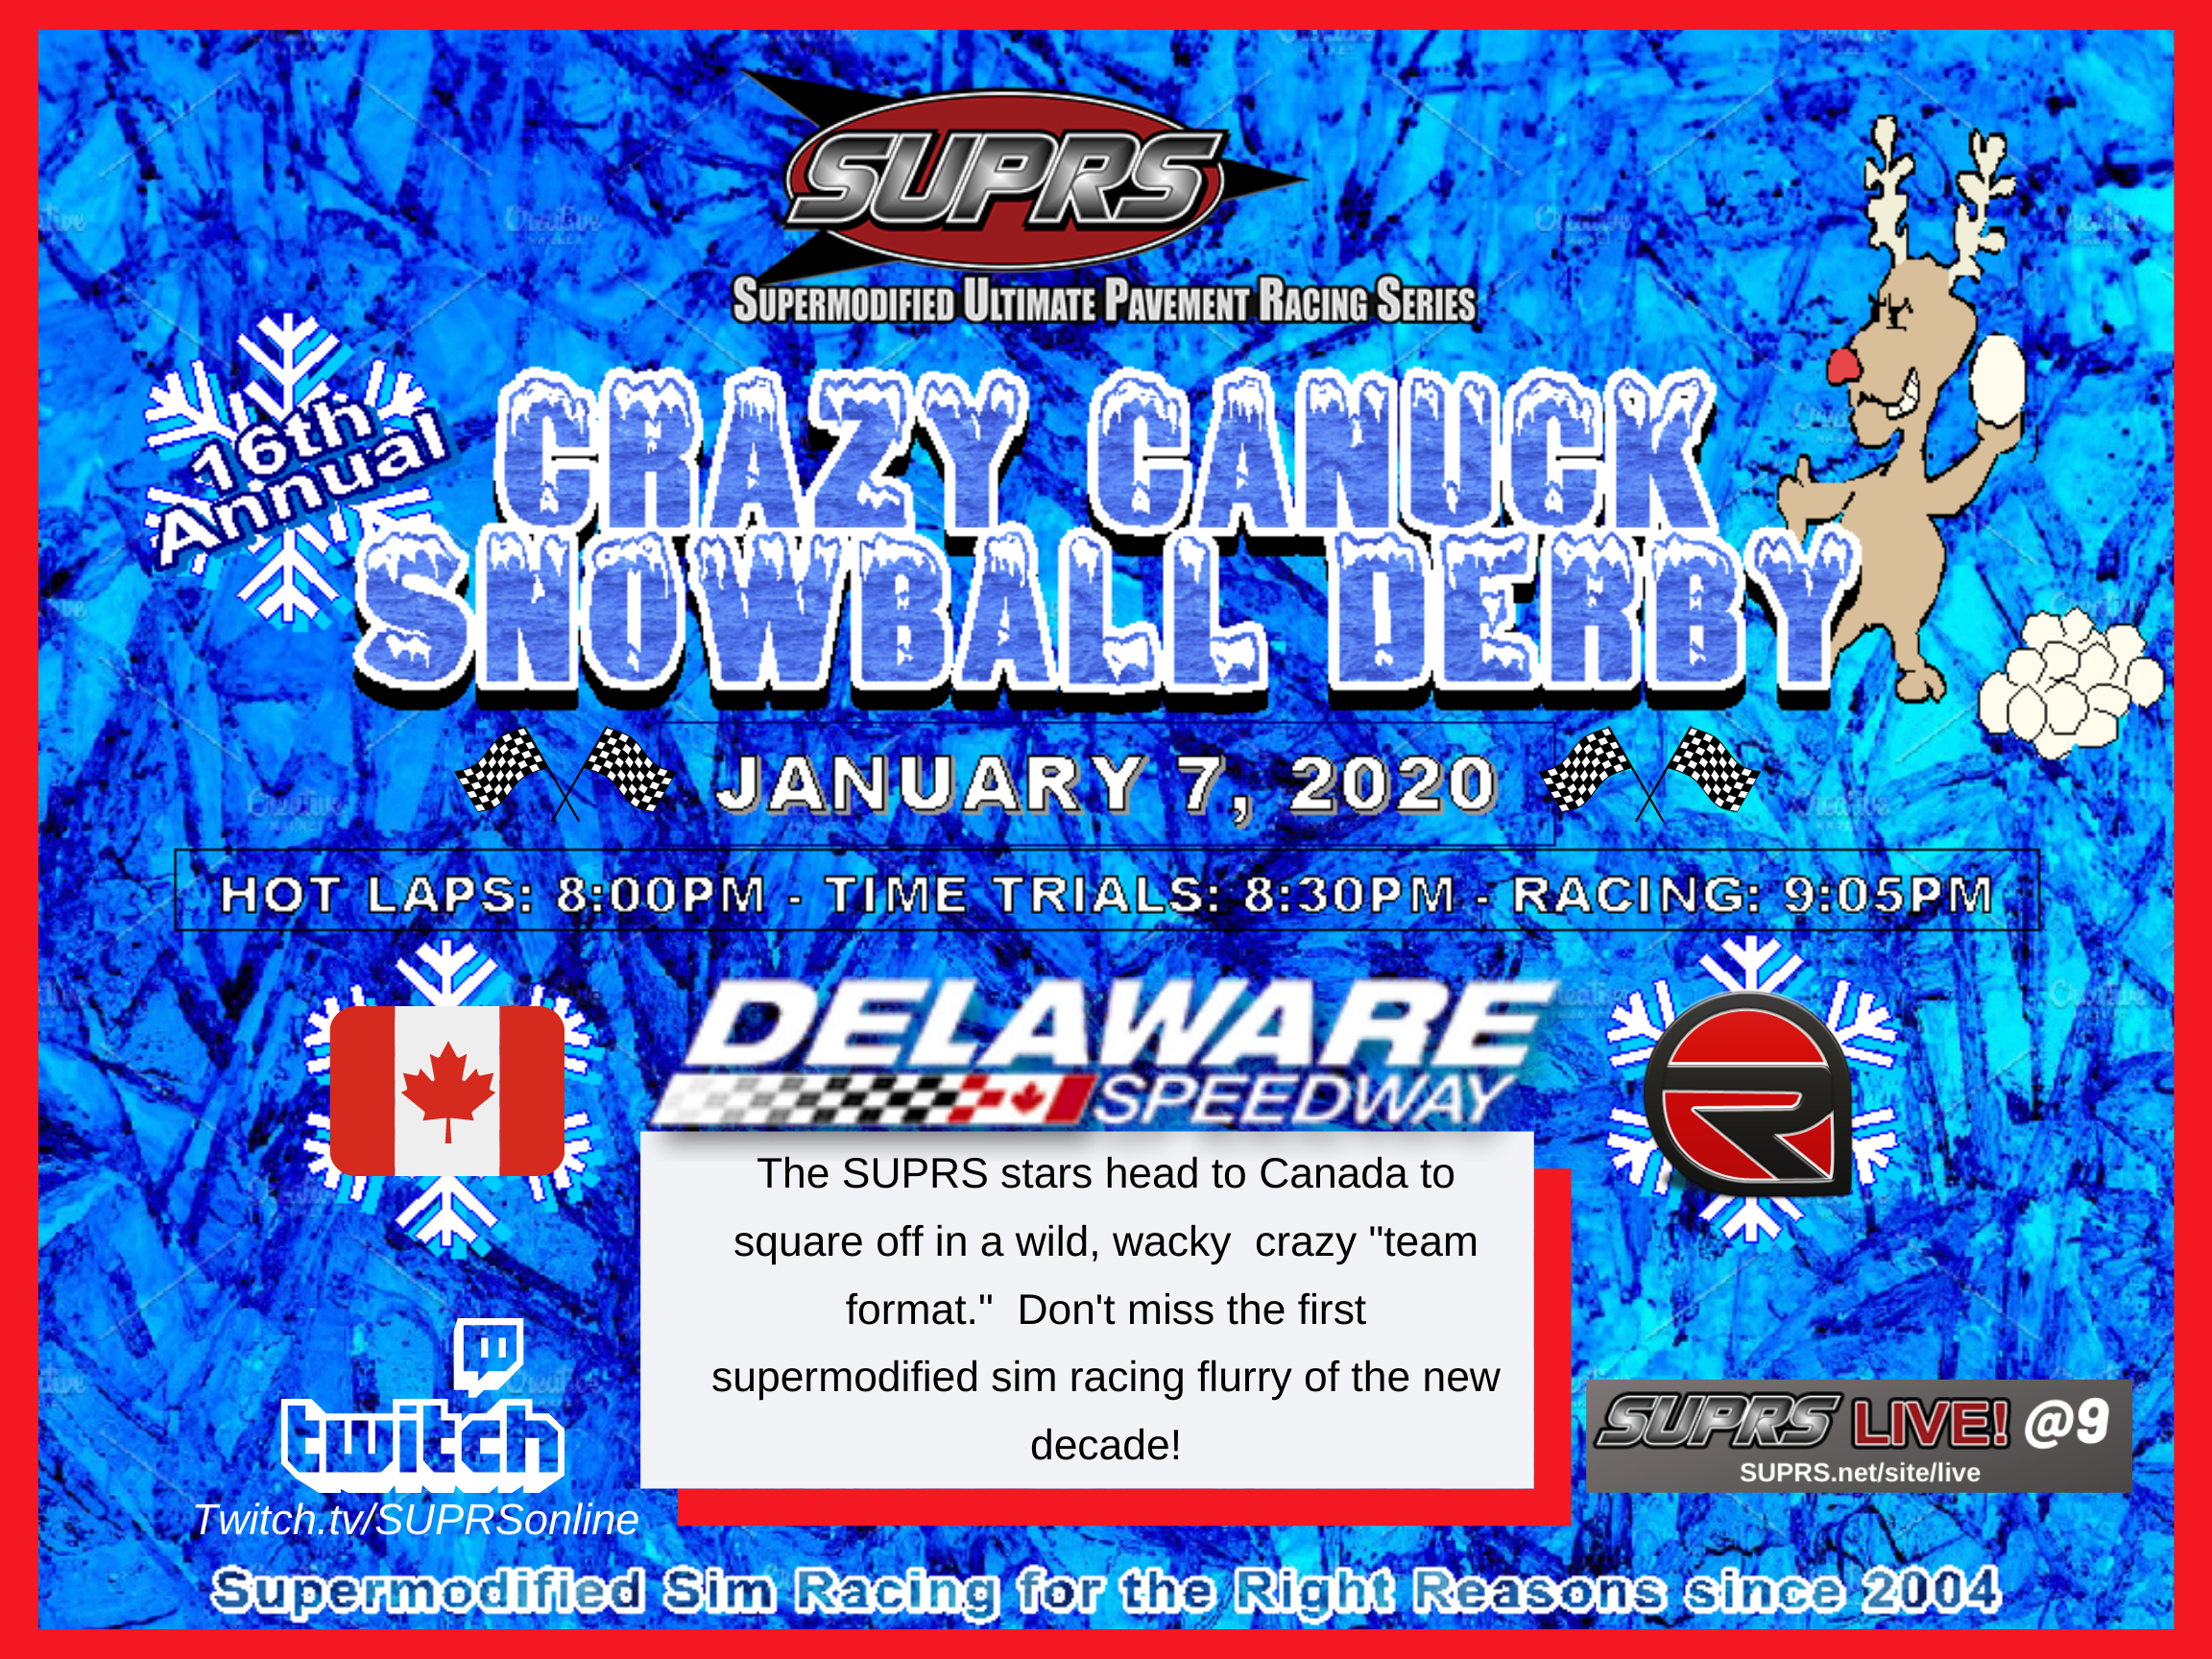 SUPRS Invades Canada for Crazy Canuck Snowball Derby SUPRS